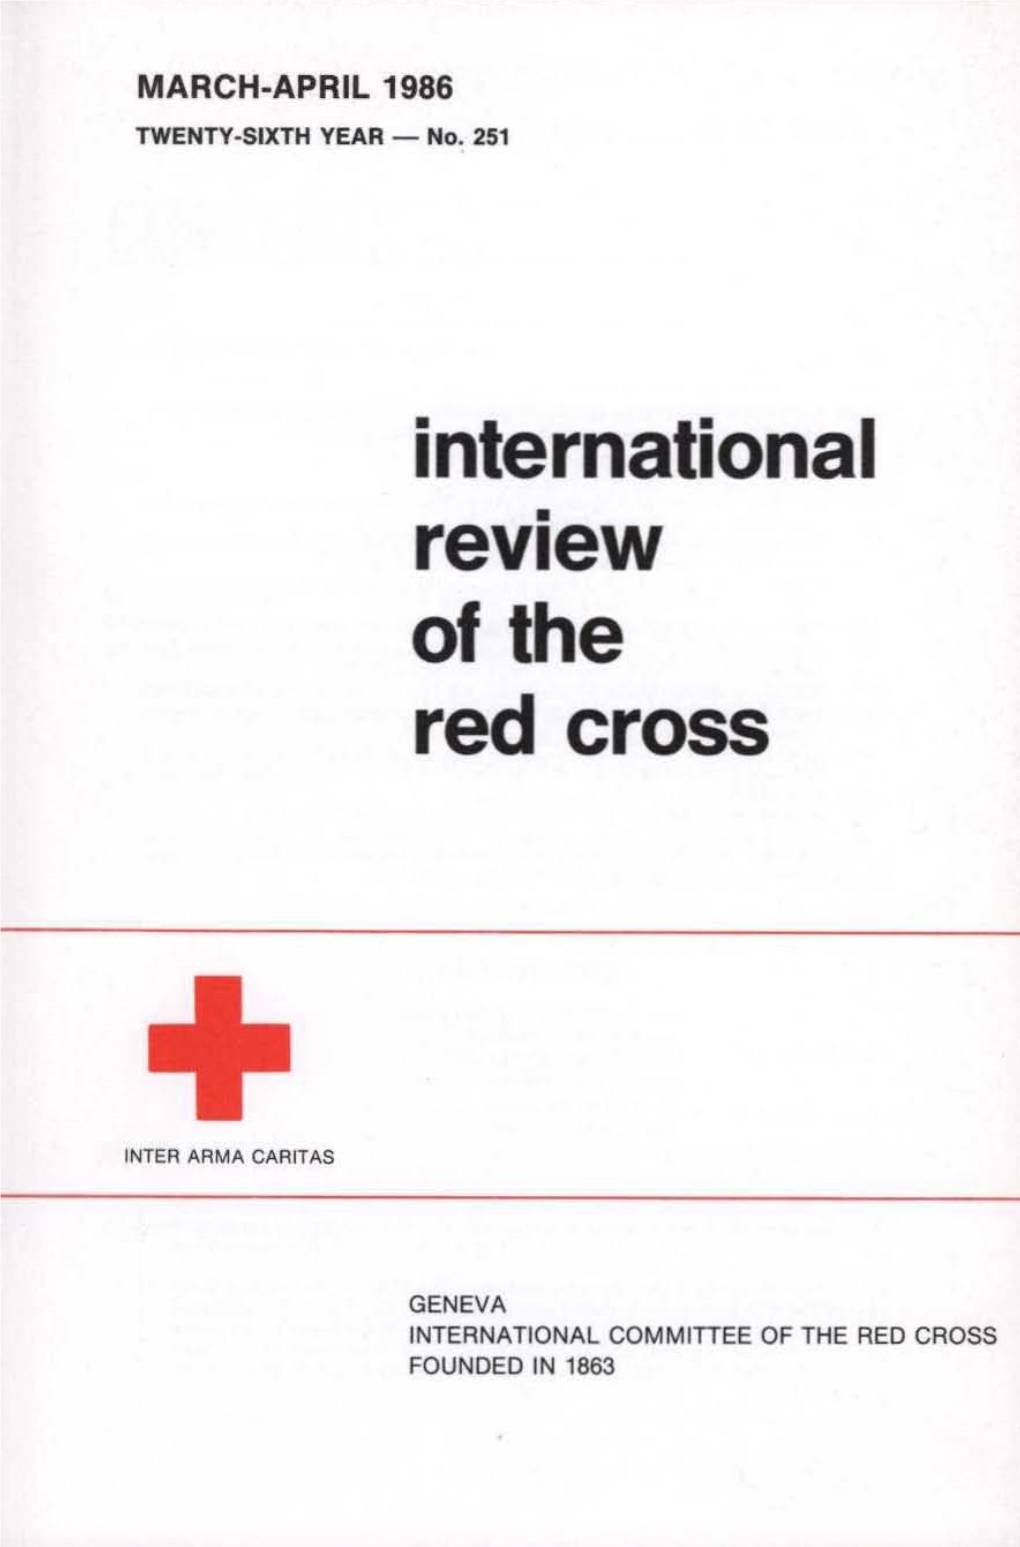 International Review of the Red Cross, March-April 1986, Twenty